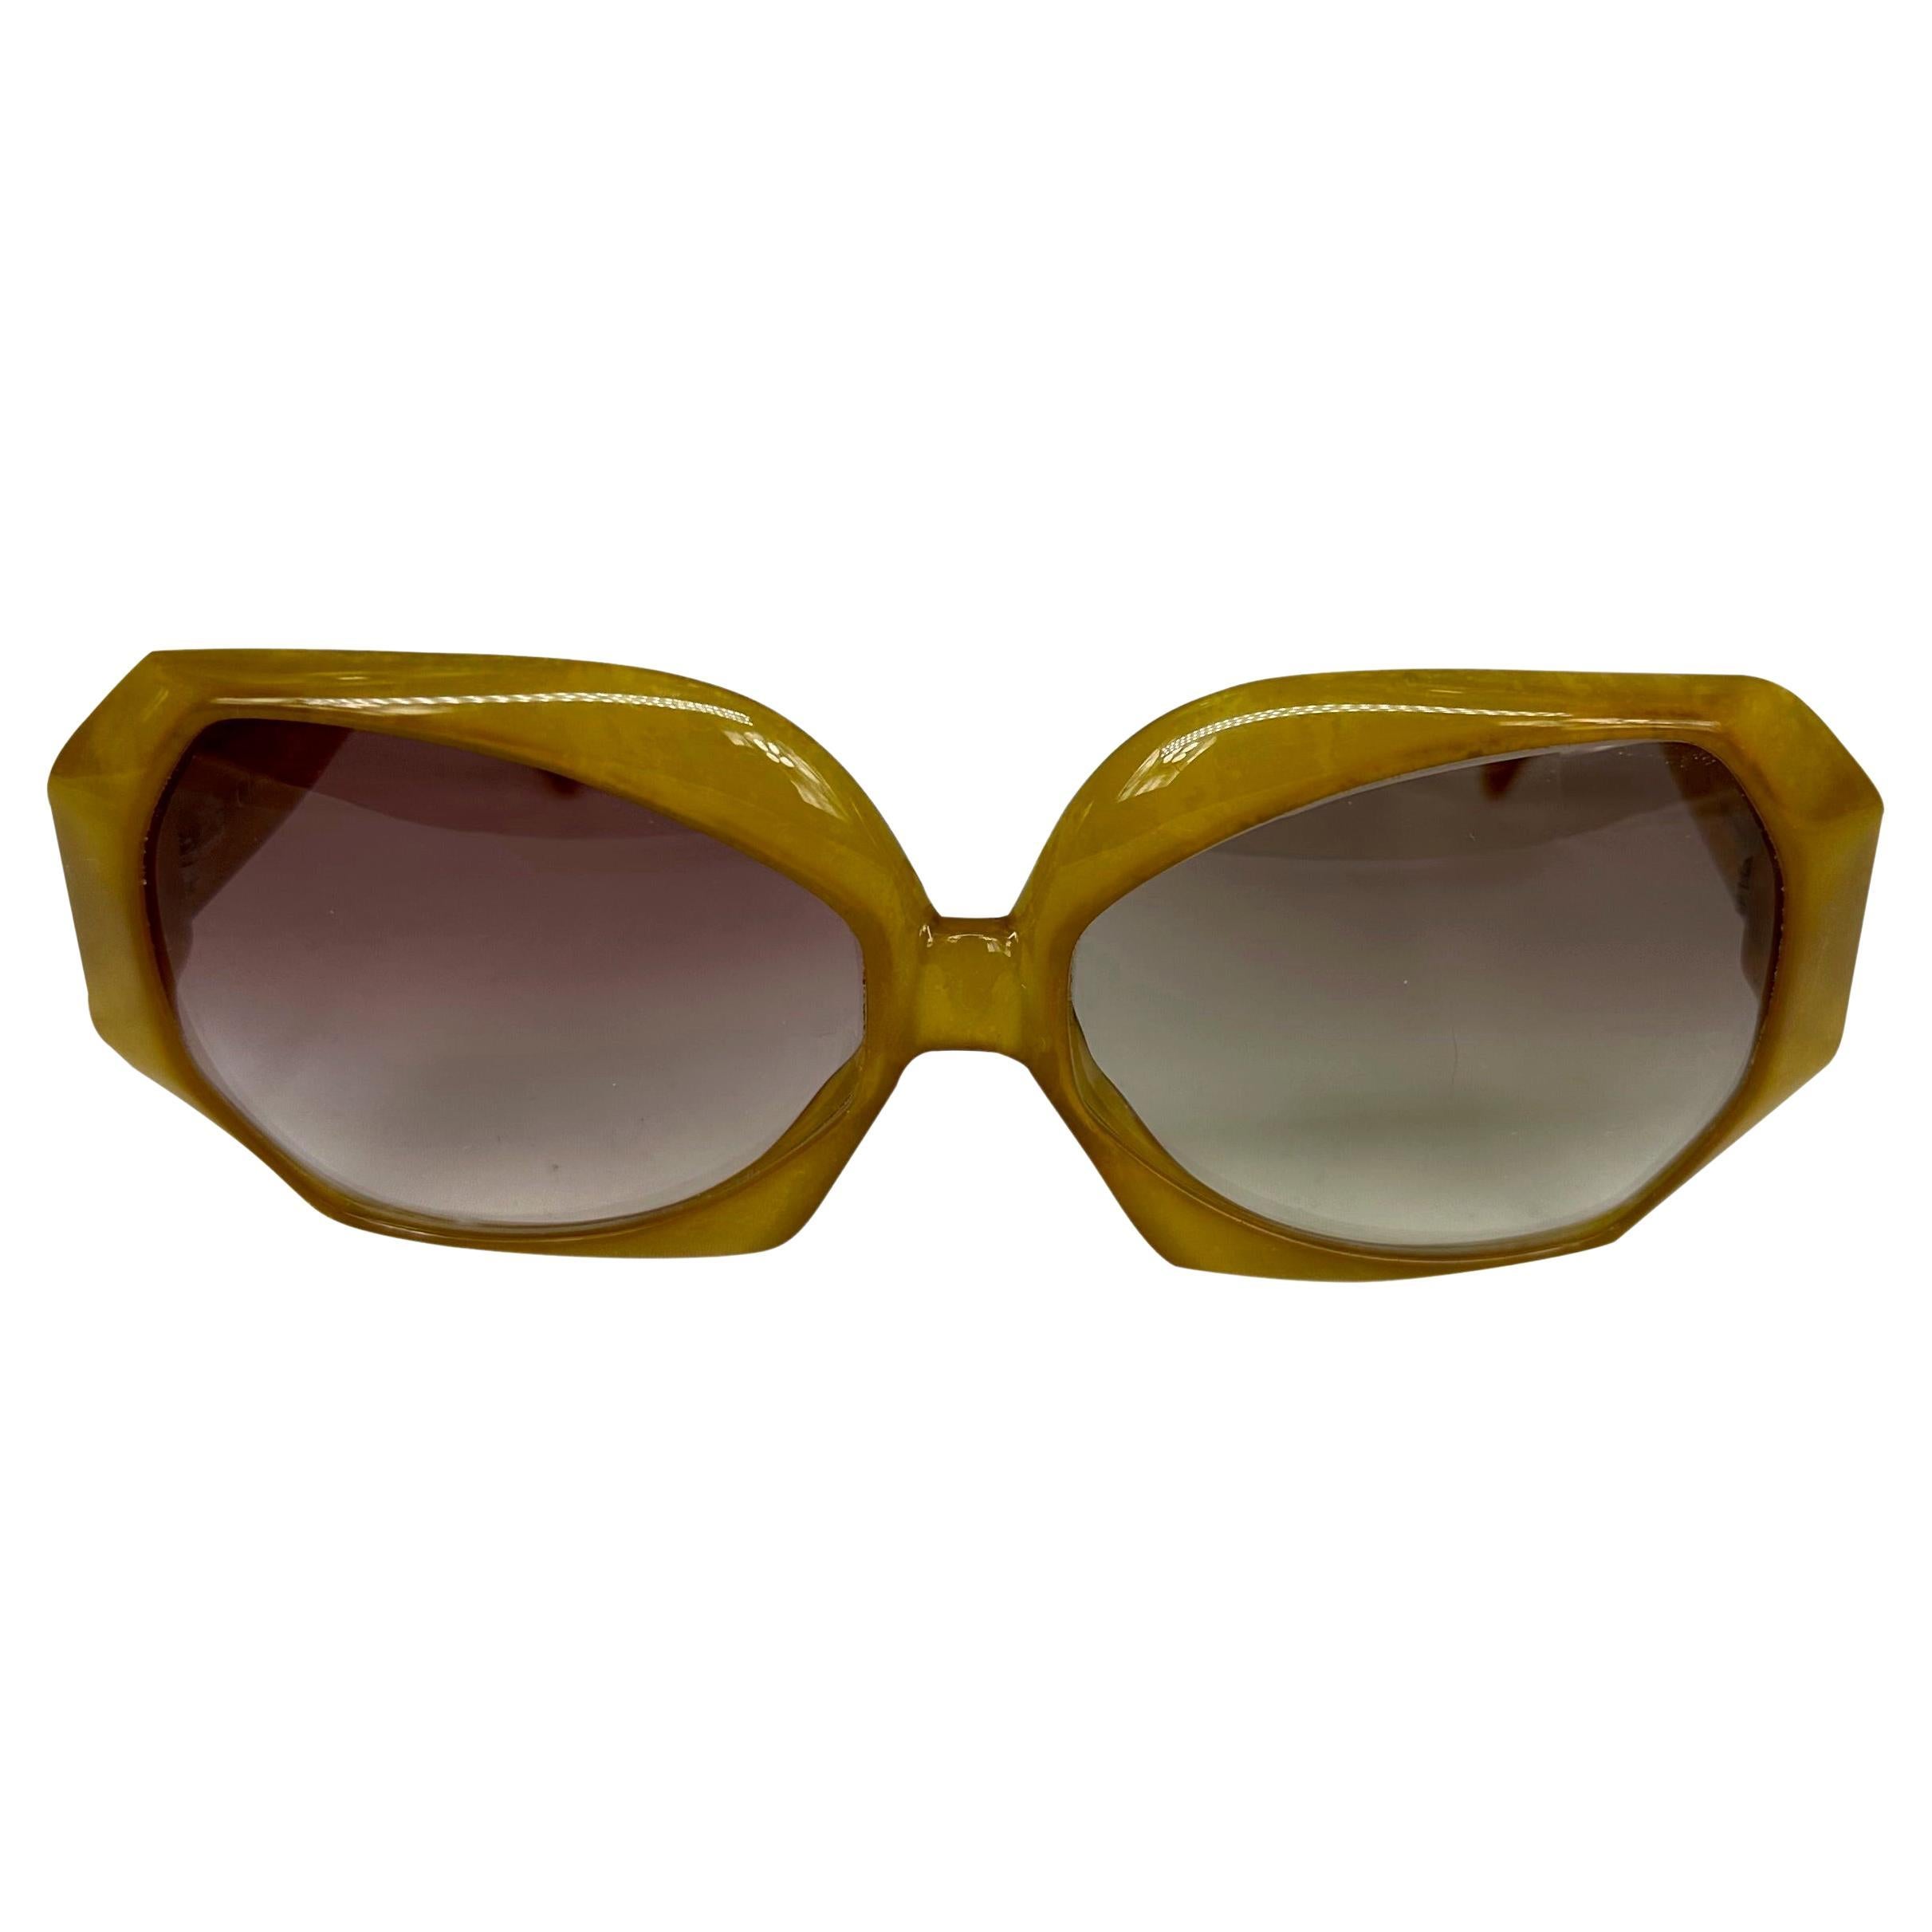 Presenting a pair of fabulous oversized Christian Dior sunglasses. From the 1980s, these honey-colored sunglasses feature an oversized octagonal frame and are made complete with a retro 'CD' logo on each arm. Add these chic and rare sunglasses to